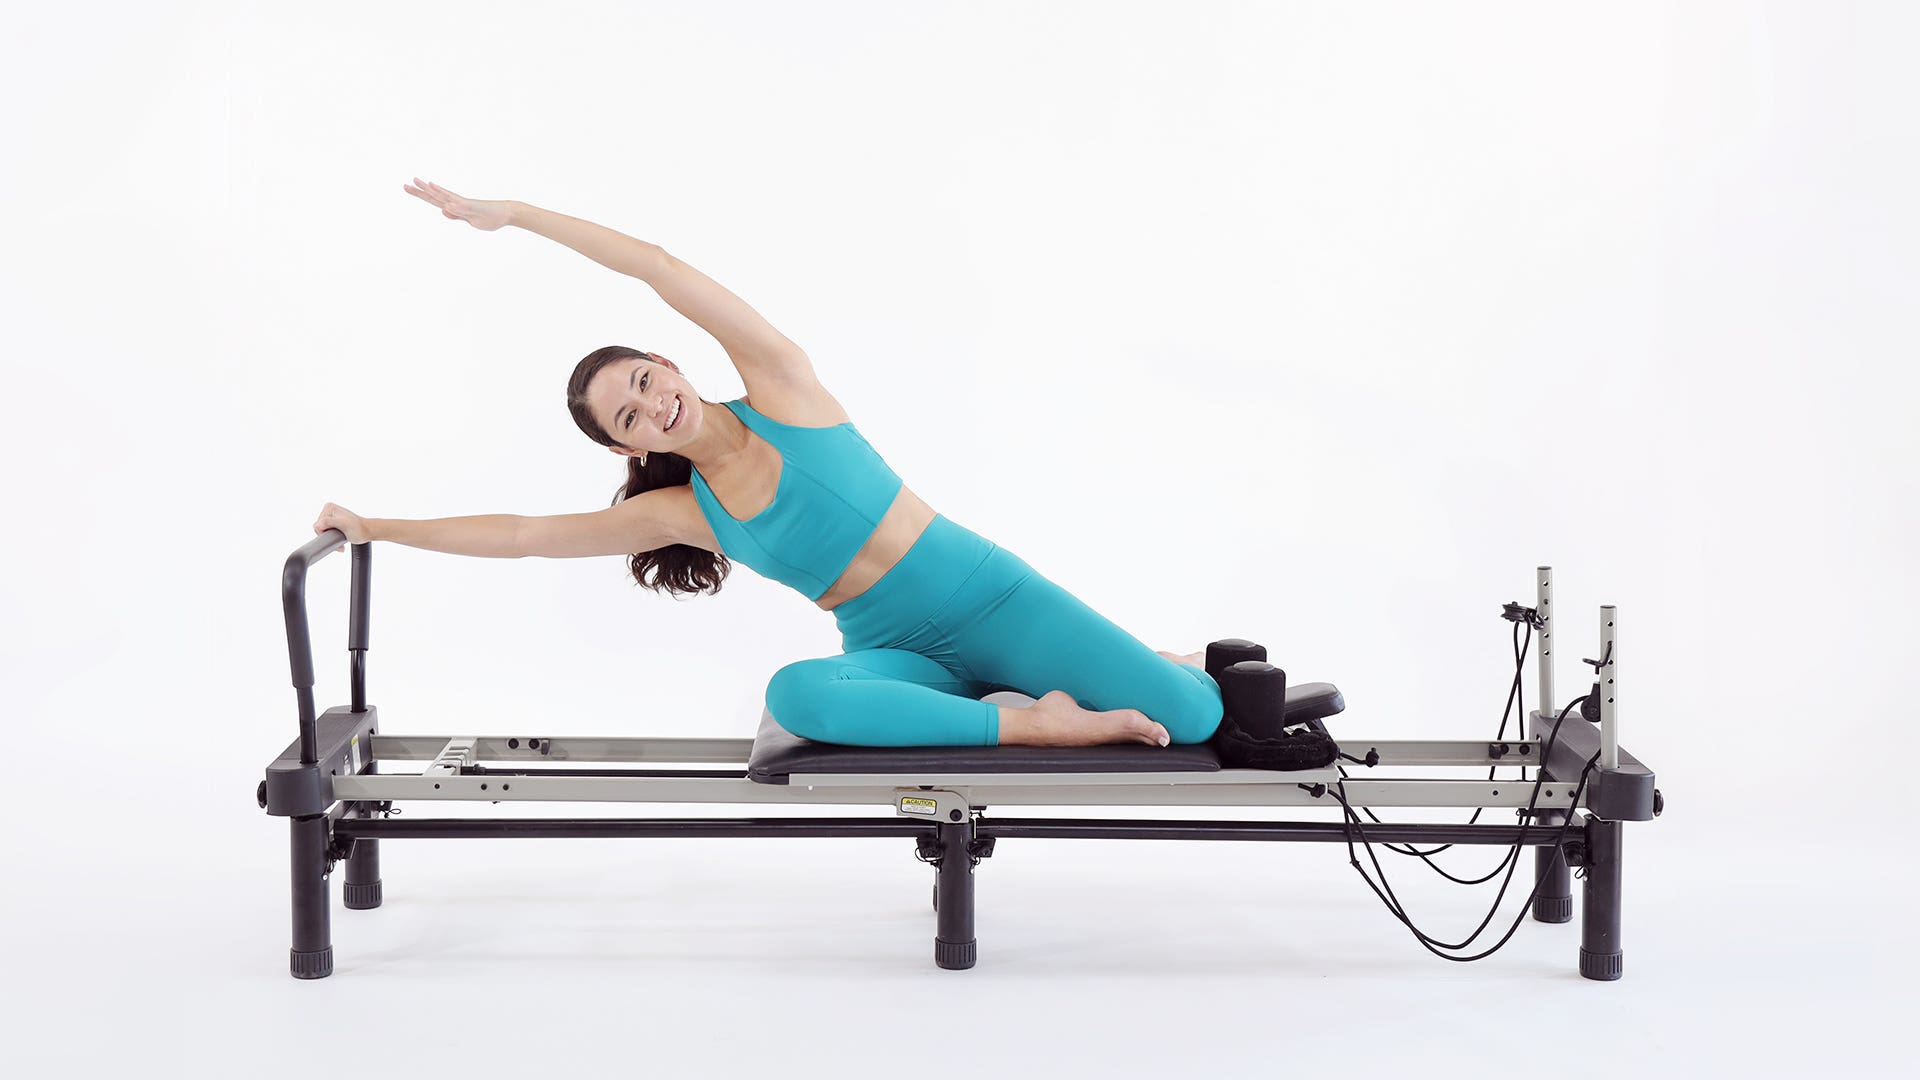 pilates-reformer-exercises-an-introduction-to-a-powerful-whole-body-hanoverorient